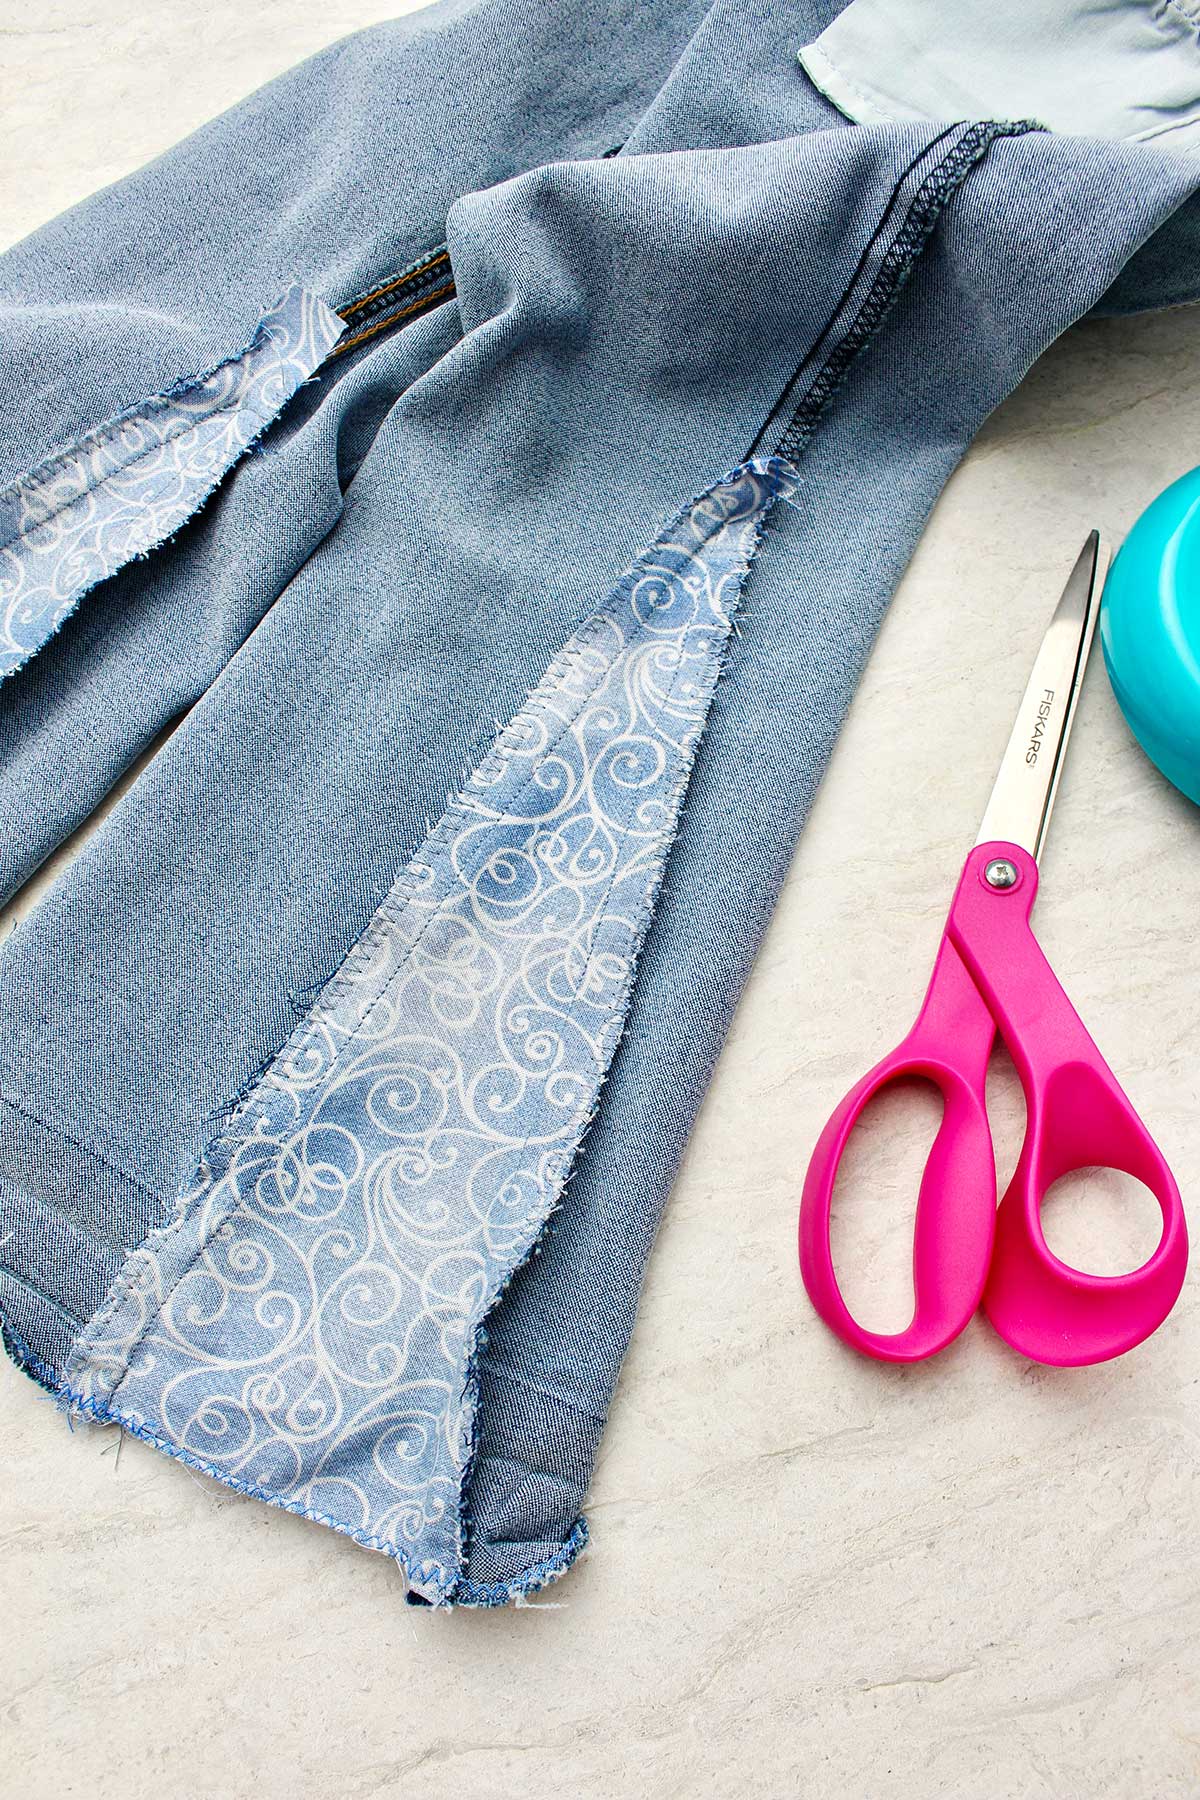 Close up view of inside out jeans with piece of fabric sewn in with scissors near by.